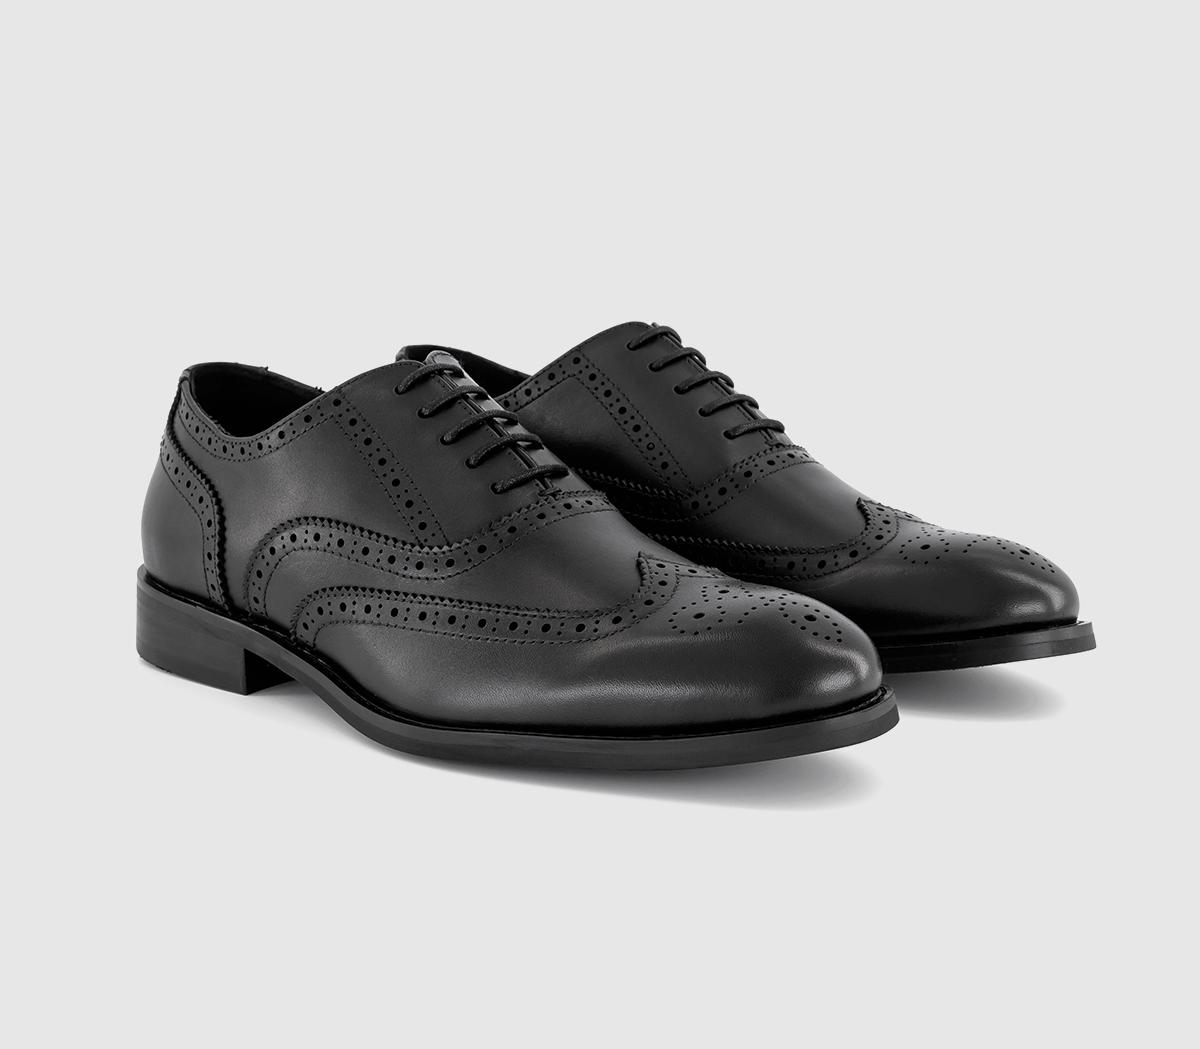 OFFICE Mens Milton Oxford Brogue Shoes Black Leather, 9